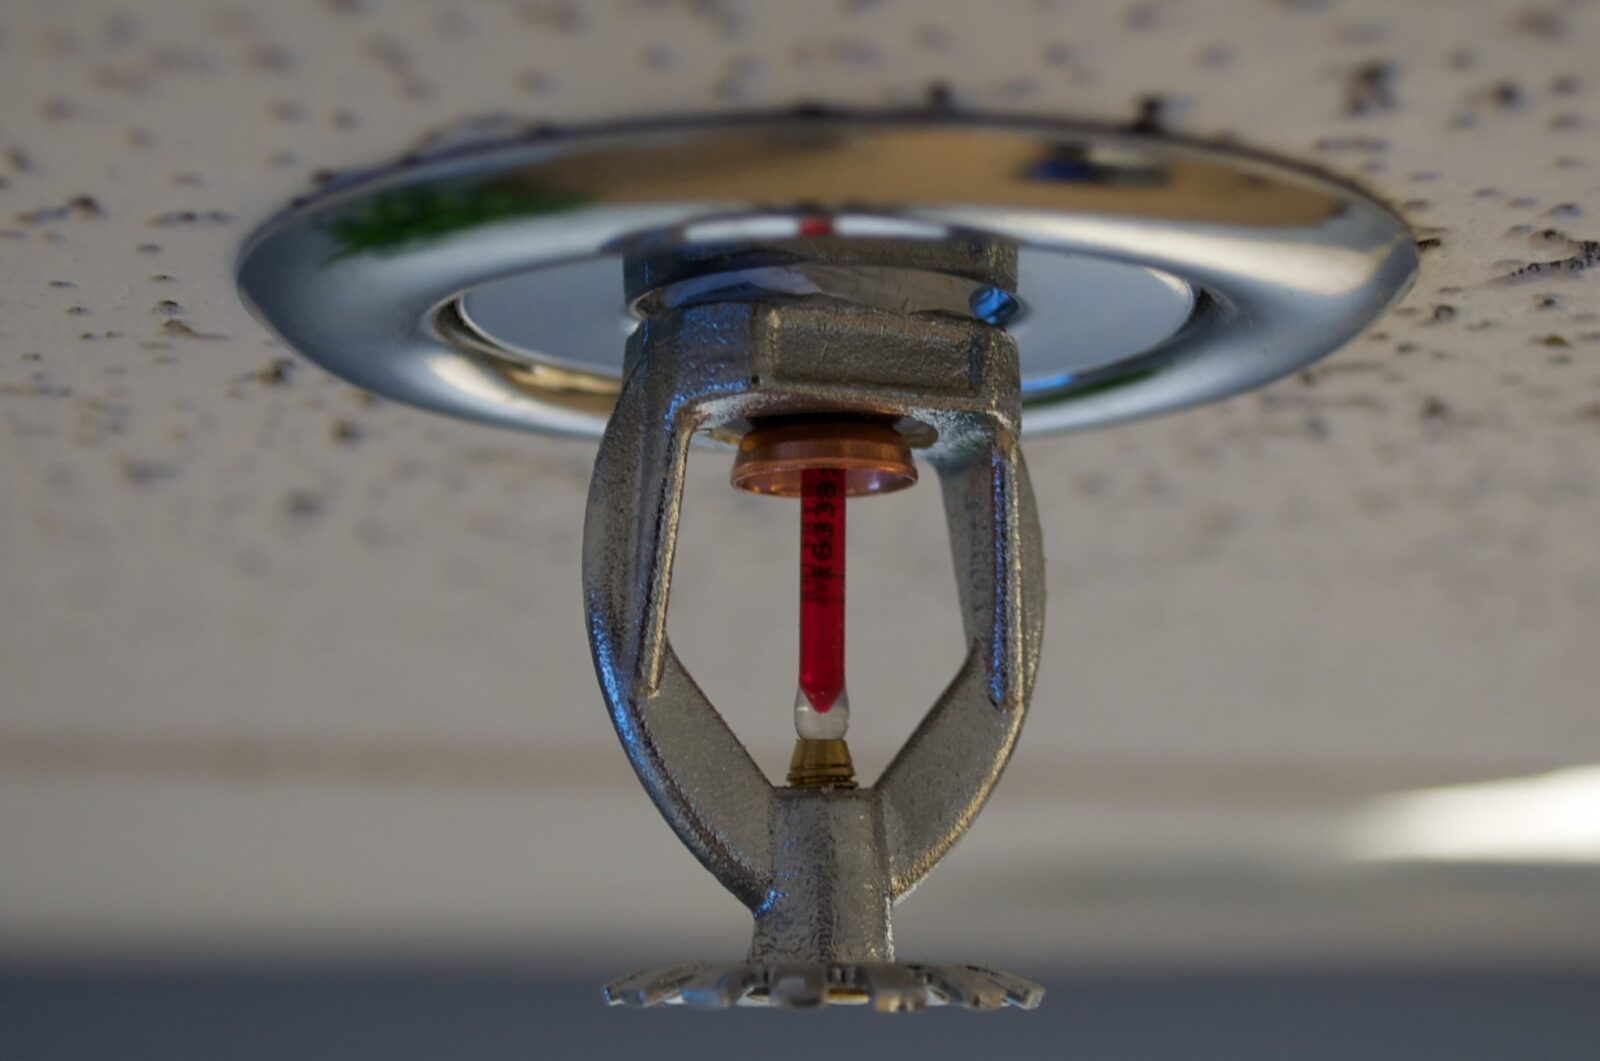 Fire Sprinkler System Installation: What to Expect